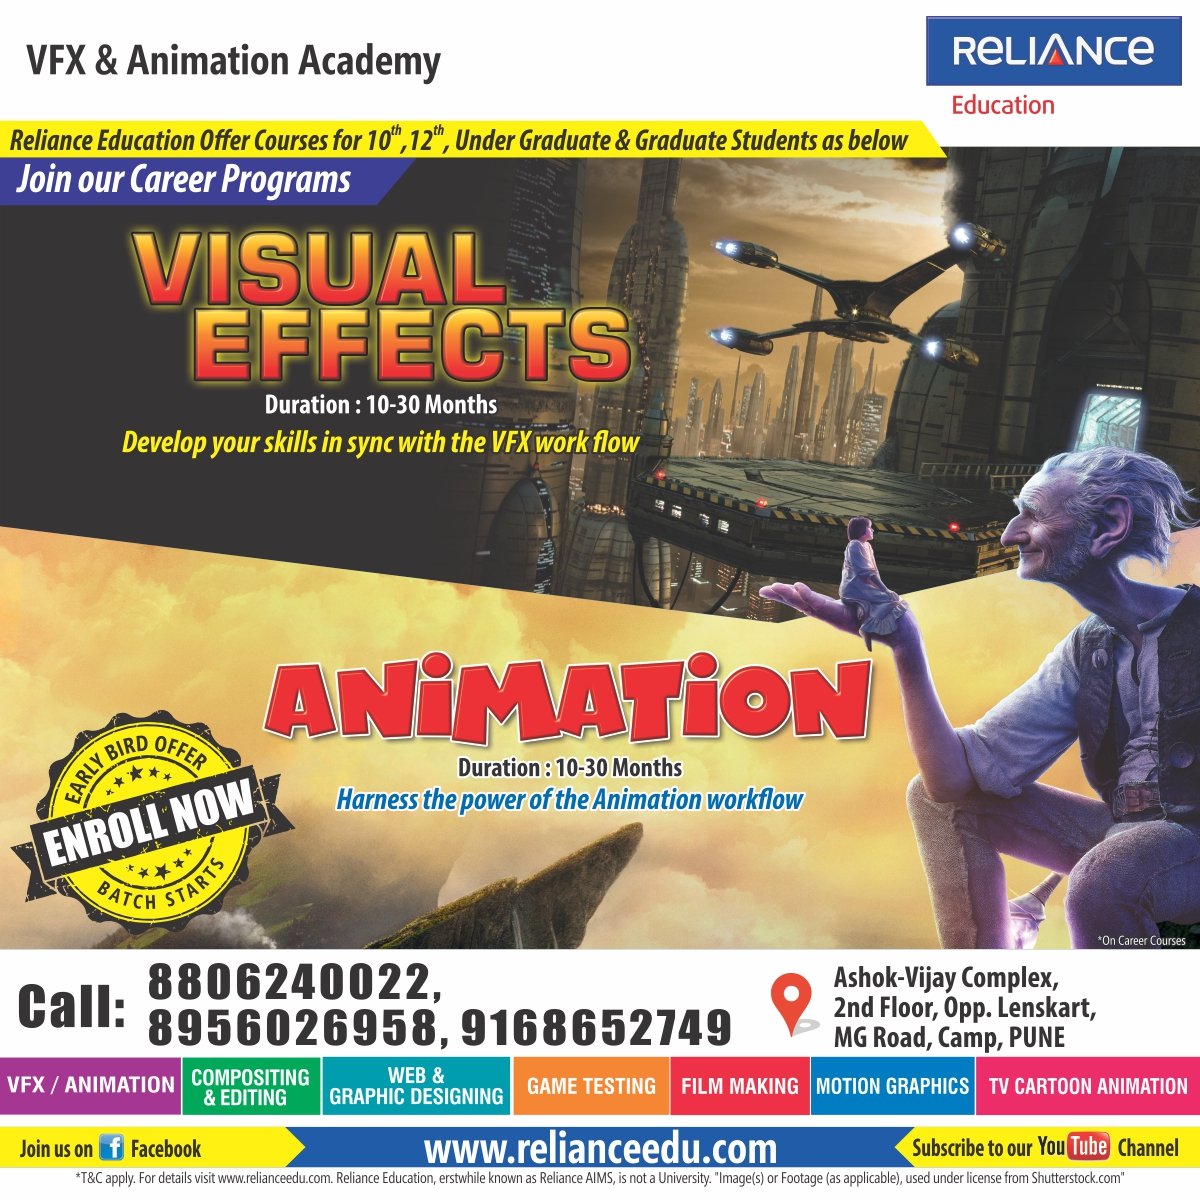 Career-Oriented Programs from Reliance Education! VFx & Animation Academy!!
Learn From the Experienced Makers..!
Call Now @ 8806240022 / 8956026958 / 9168652749 or browse for more details.
#RelianceEducation #RelianceAnimation #RelianceCareerPrograms #RelianceVisualEffectsCourses